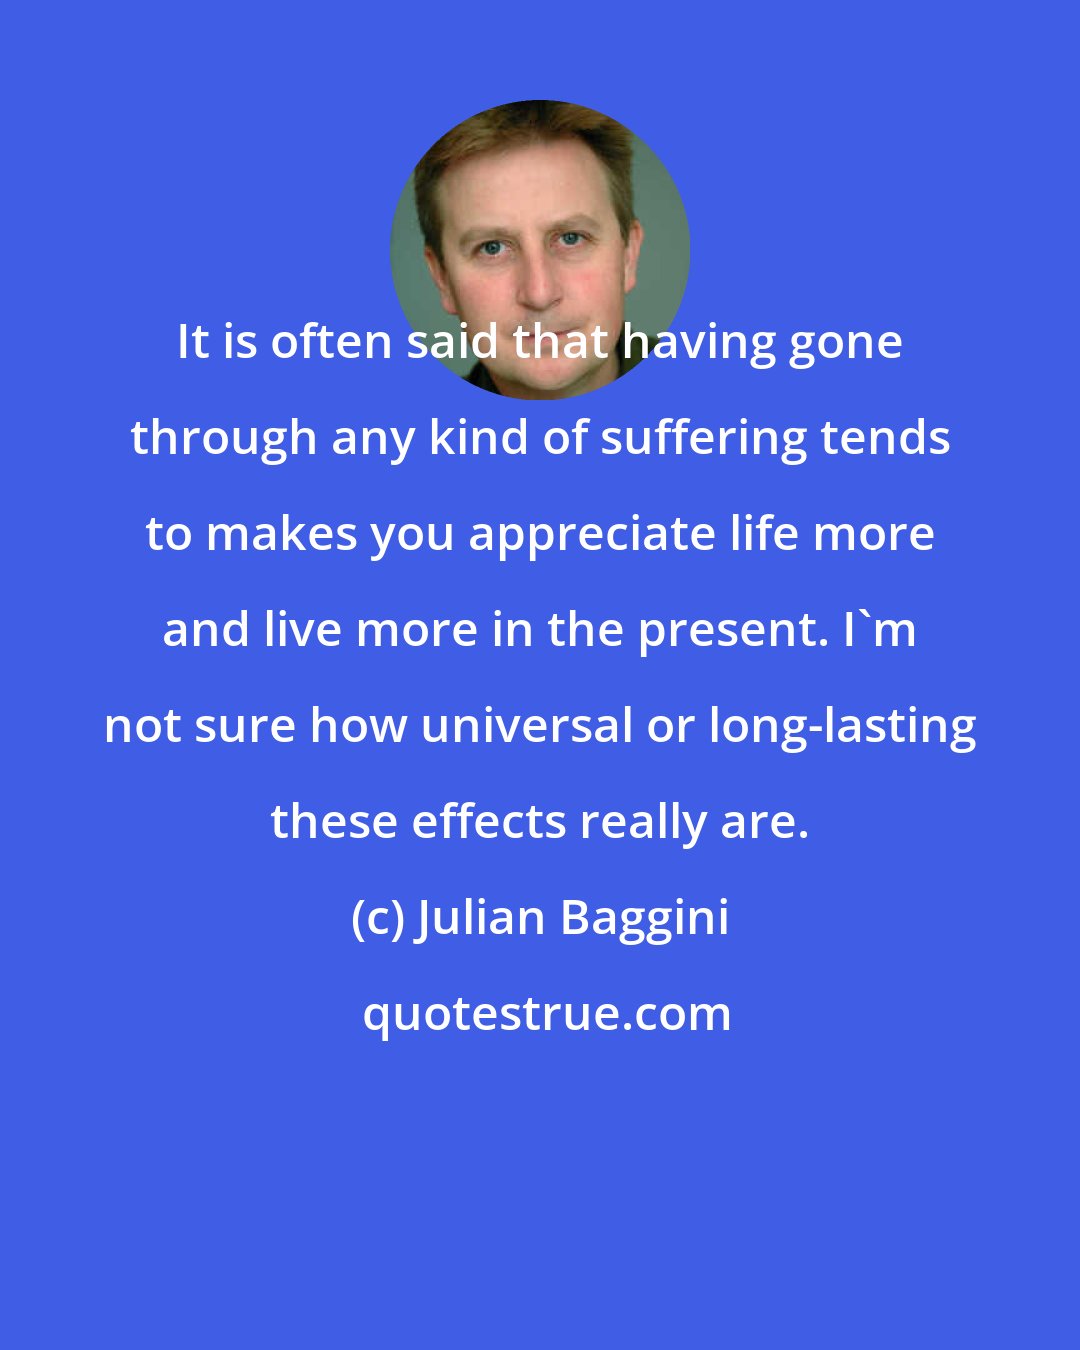 Julian Baggini: It is often said that having gone through any kind of suffering tends to makes you appreciate life more and live more in the present. I'm not sure how universal or long-lasting these effects really are.